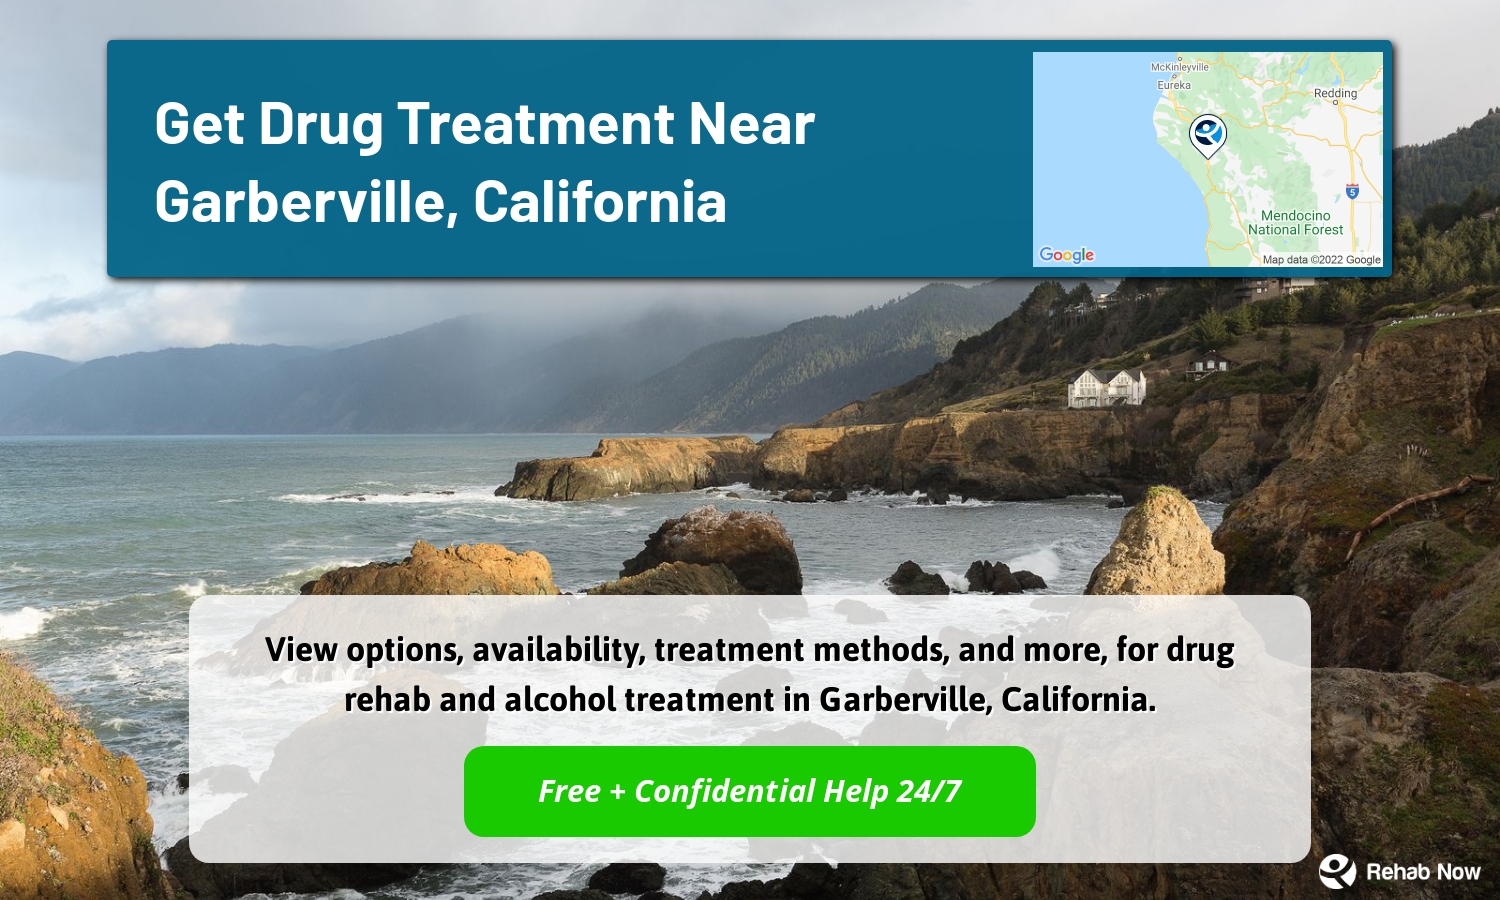 View options, availability, treatment methods, and more, for drug rehab and alcohol treatment in Garberville, California.